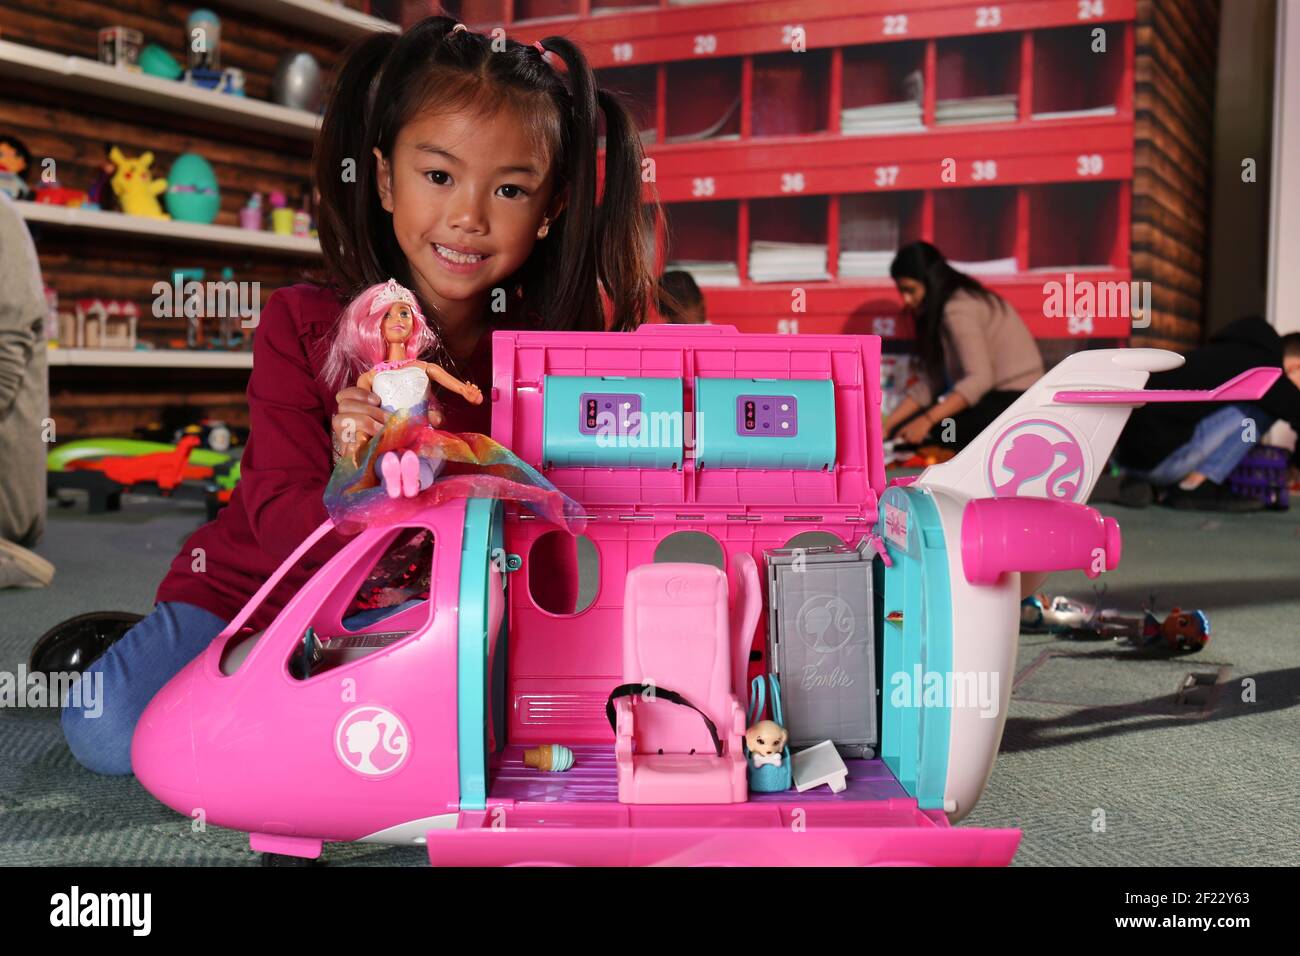 6-year-old Trilyna plays with the Barbie Dreamplane playset, one of the Top 12 toys this Christmas unveiled at Dreamtoys 2019 in London. The list, issued by the Toy Retailers Association predicts what will be hot this Christmas. It is selected by a panel of retailers and industry experts and is fiercely independent of toy manufacturers and makers. Photo credit should read: Katie Collins/EMPICS Entertainment/Alamy Stock Photo